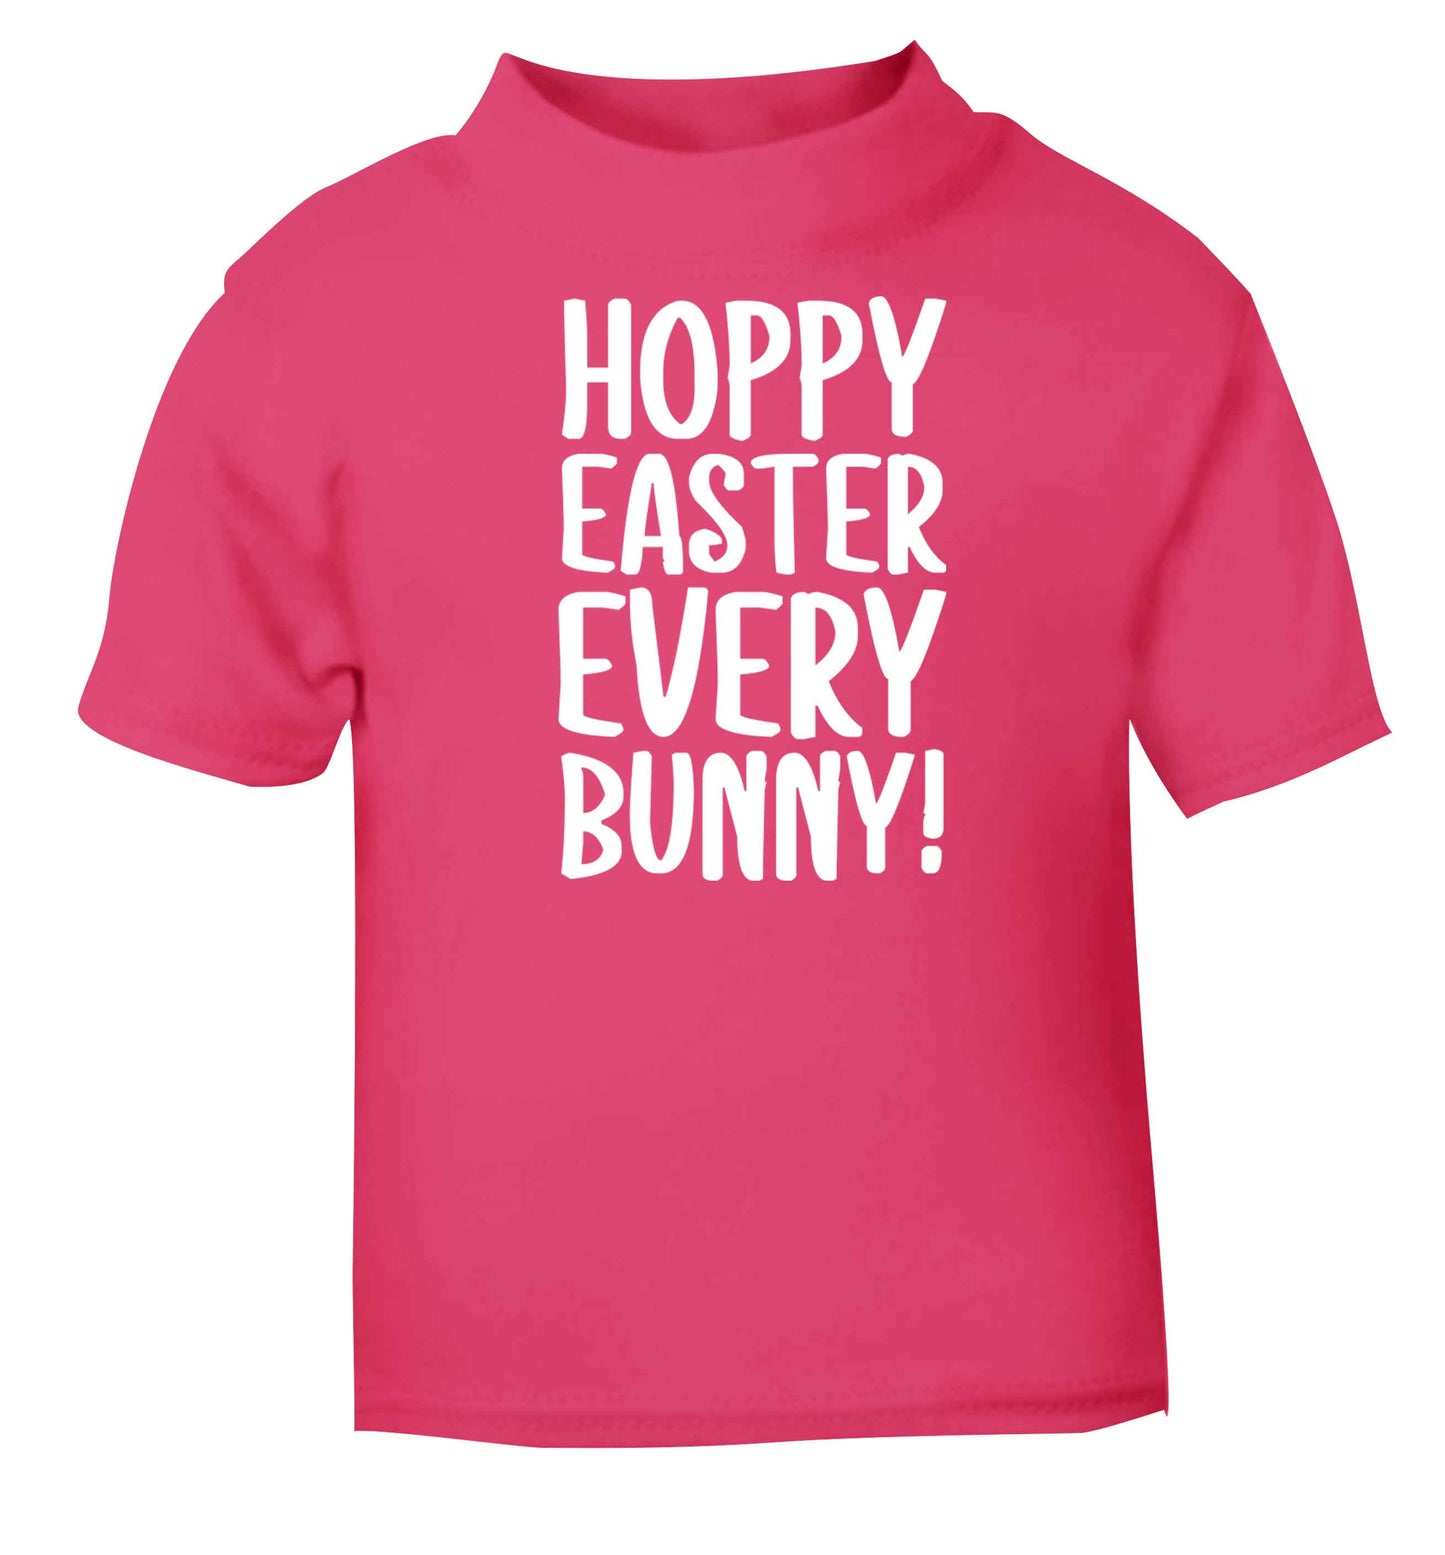 Hoppy Easter every bunny! pink baby toddler Tshirt 2 Years